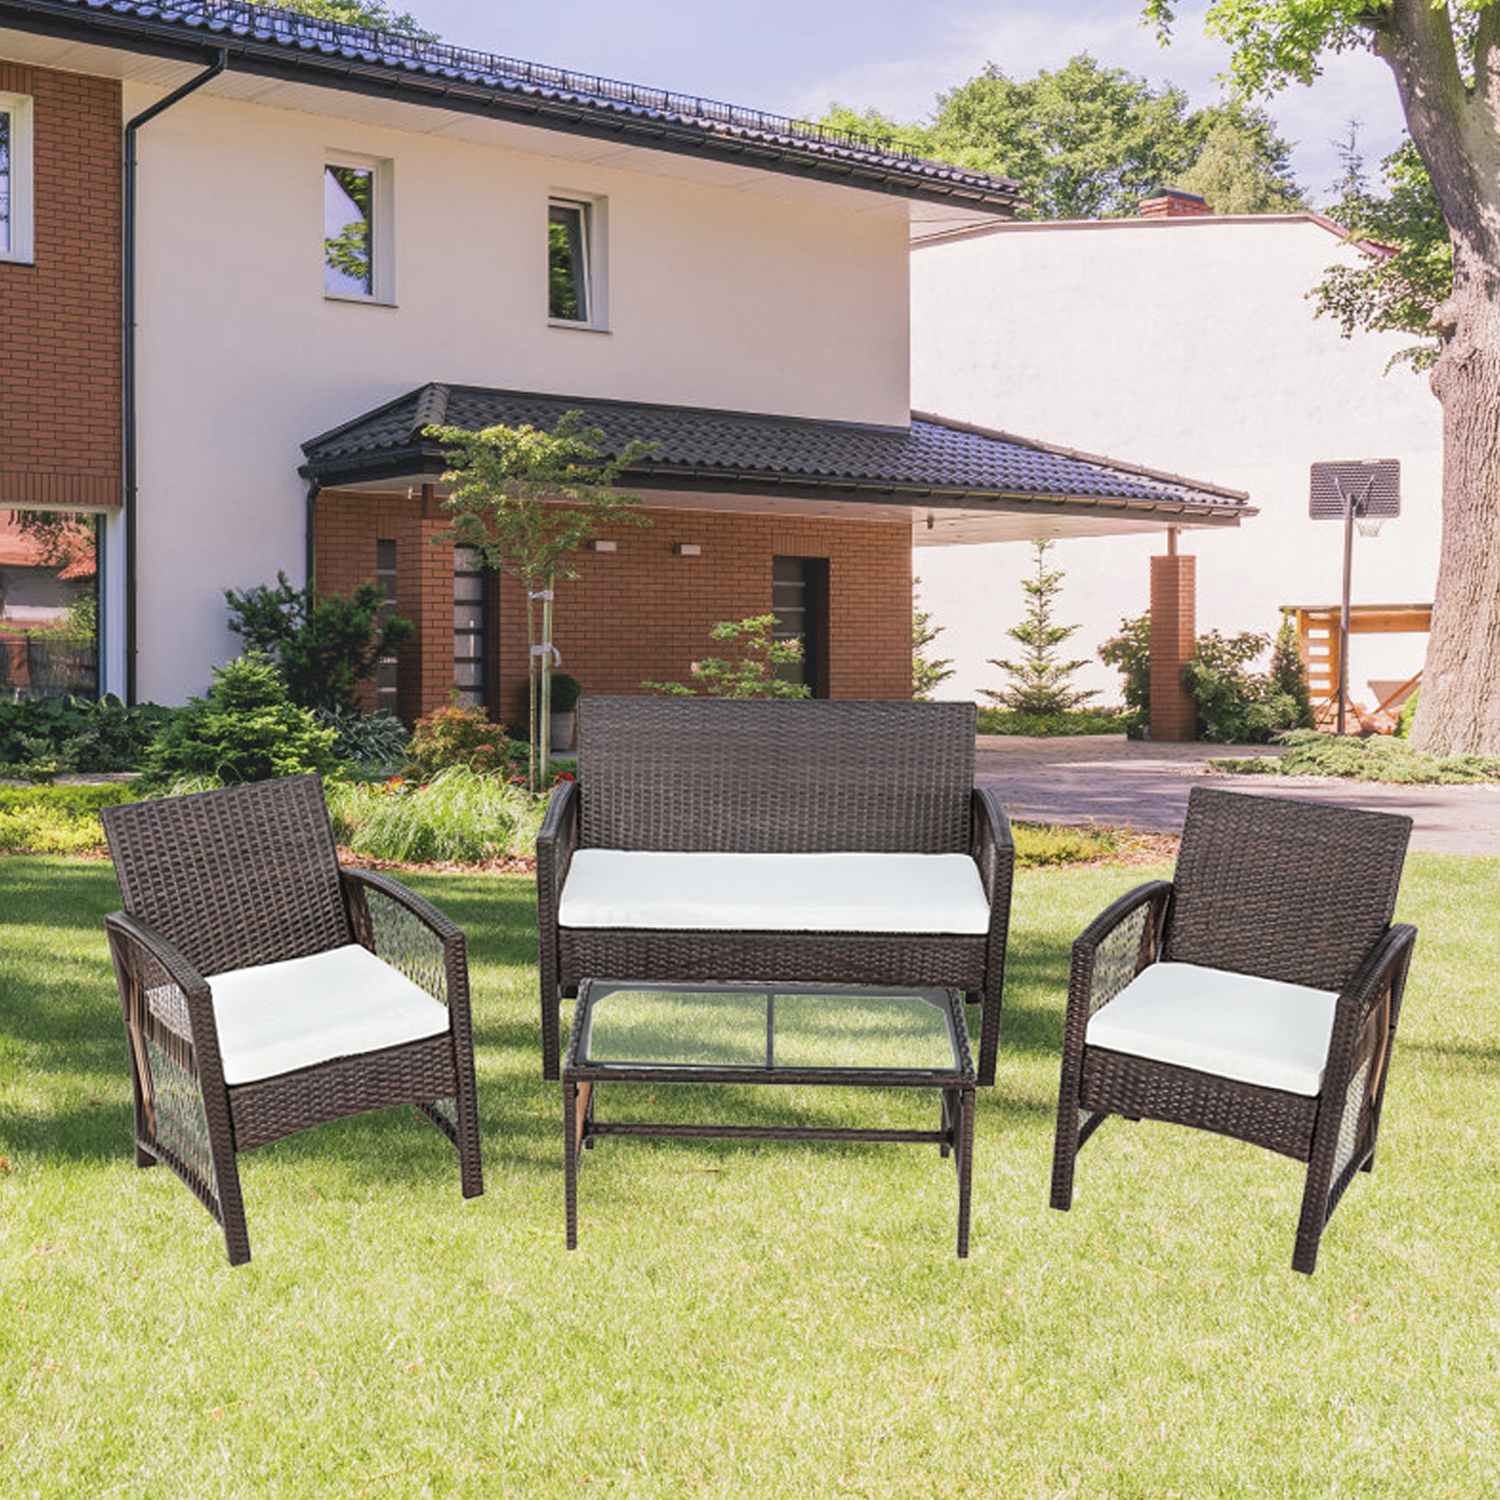 Patio Outdoor Furniture Sets, UHOMEPRO 4 Pieces PE Rattan Garden Furniture Wicker Chairs Set with Coffee Table, Outdoor Conversation Sets, Patio Dining Set for Backyard Poolside Porch, Brown, W7763 - image 3 of 11